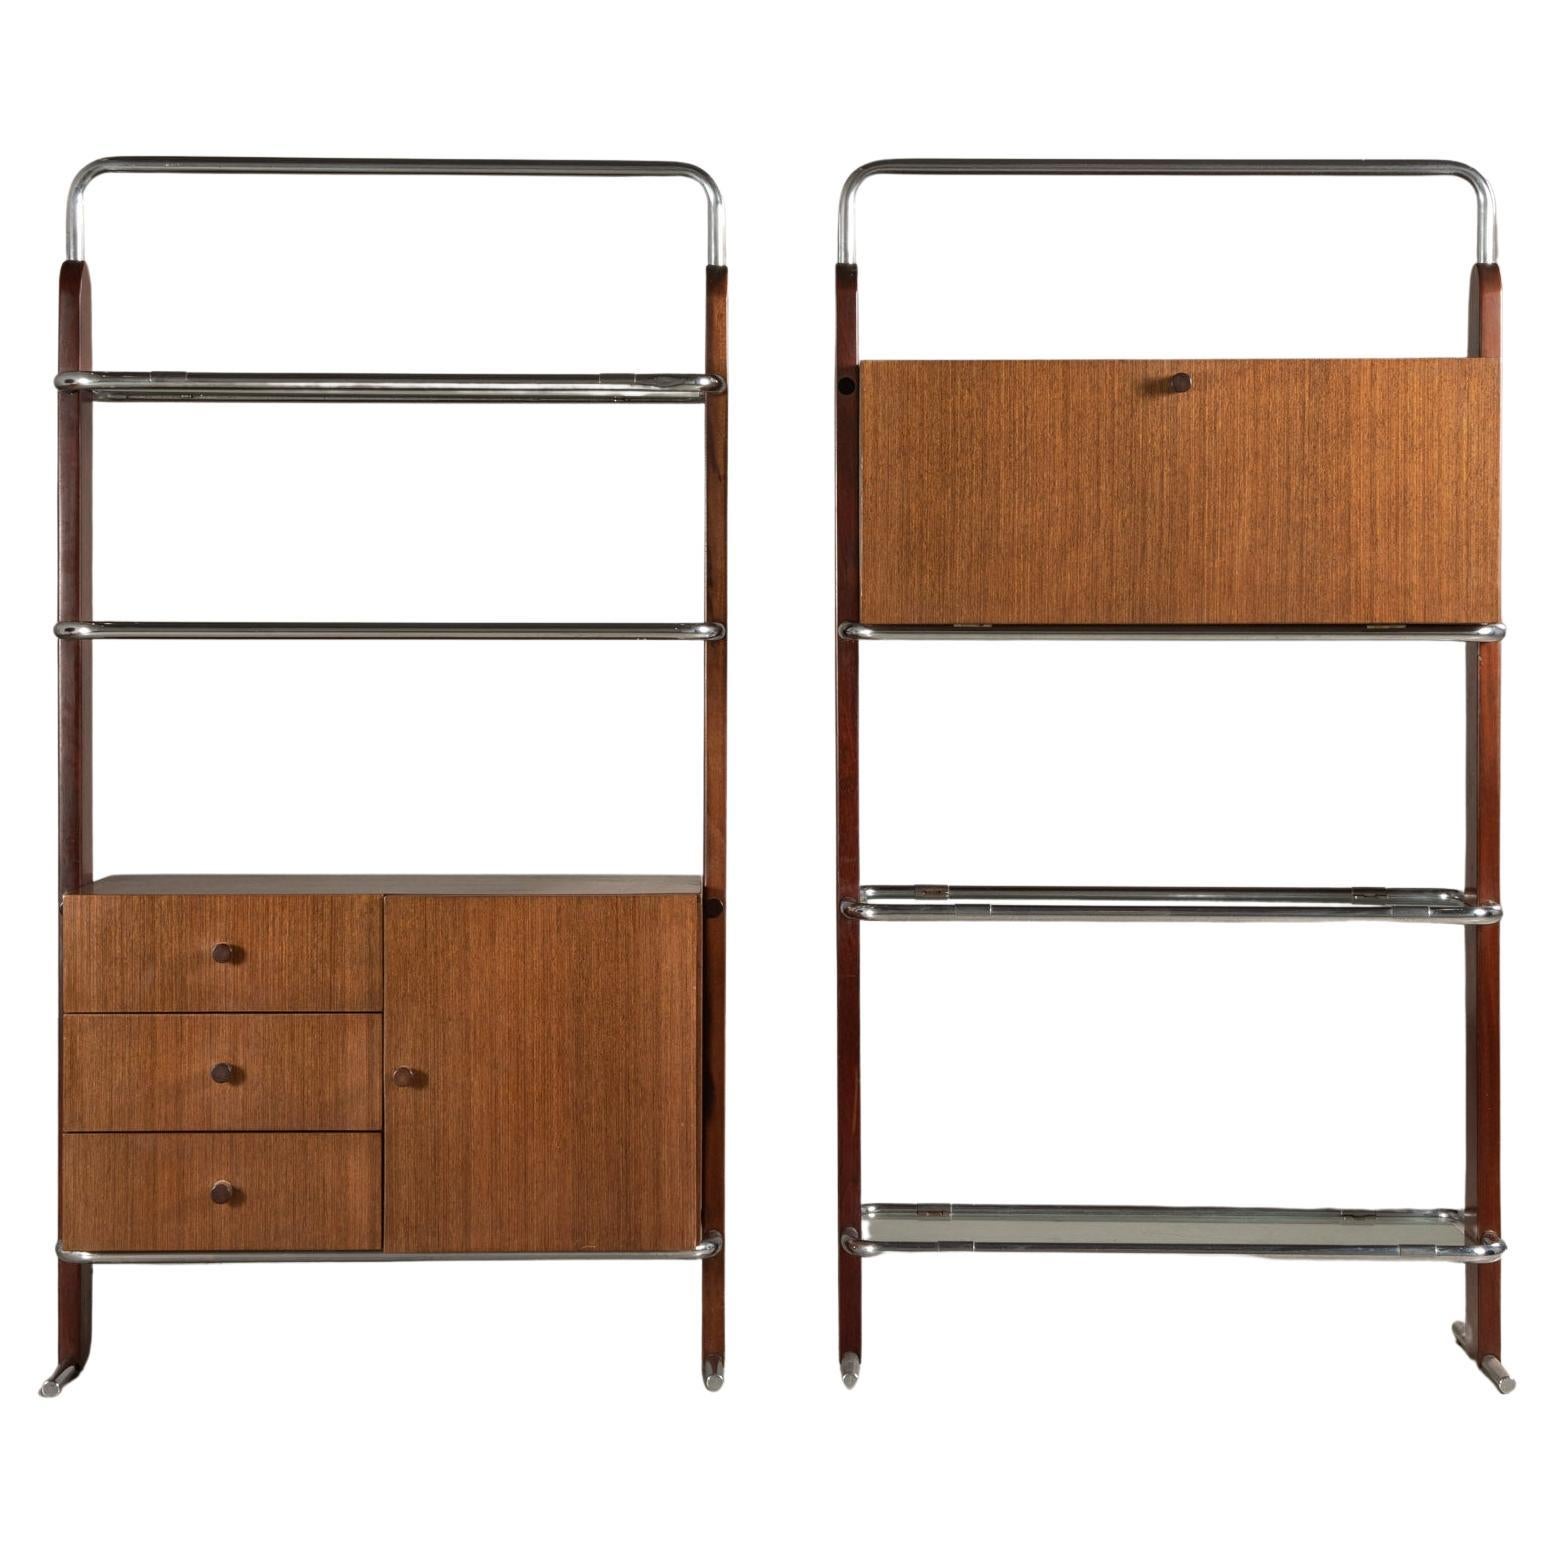 Pair of Shelf of Units, by Percival Lafer, Brazilian Mid-Century Design 